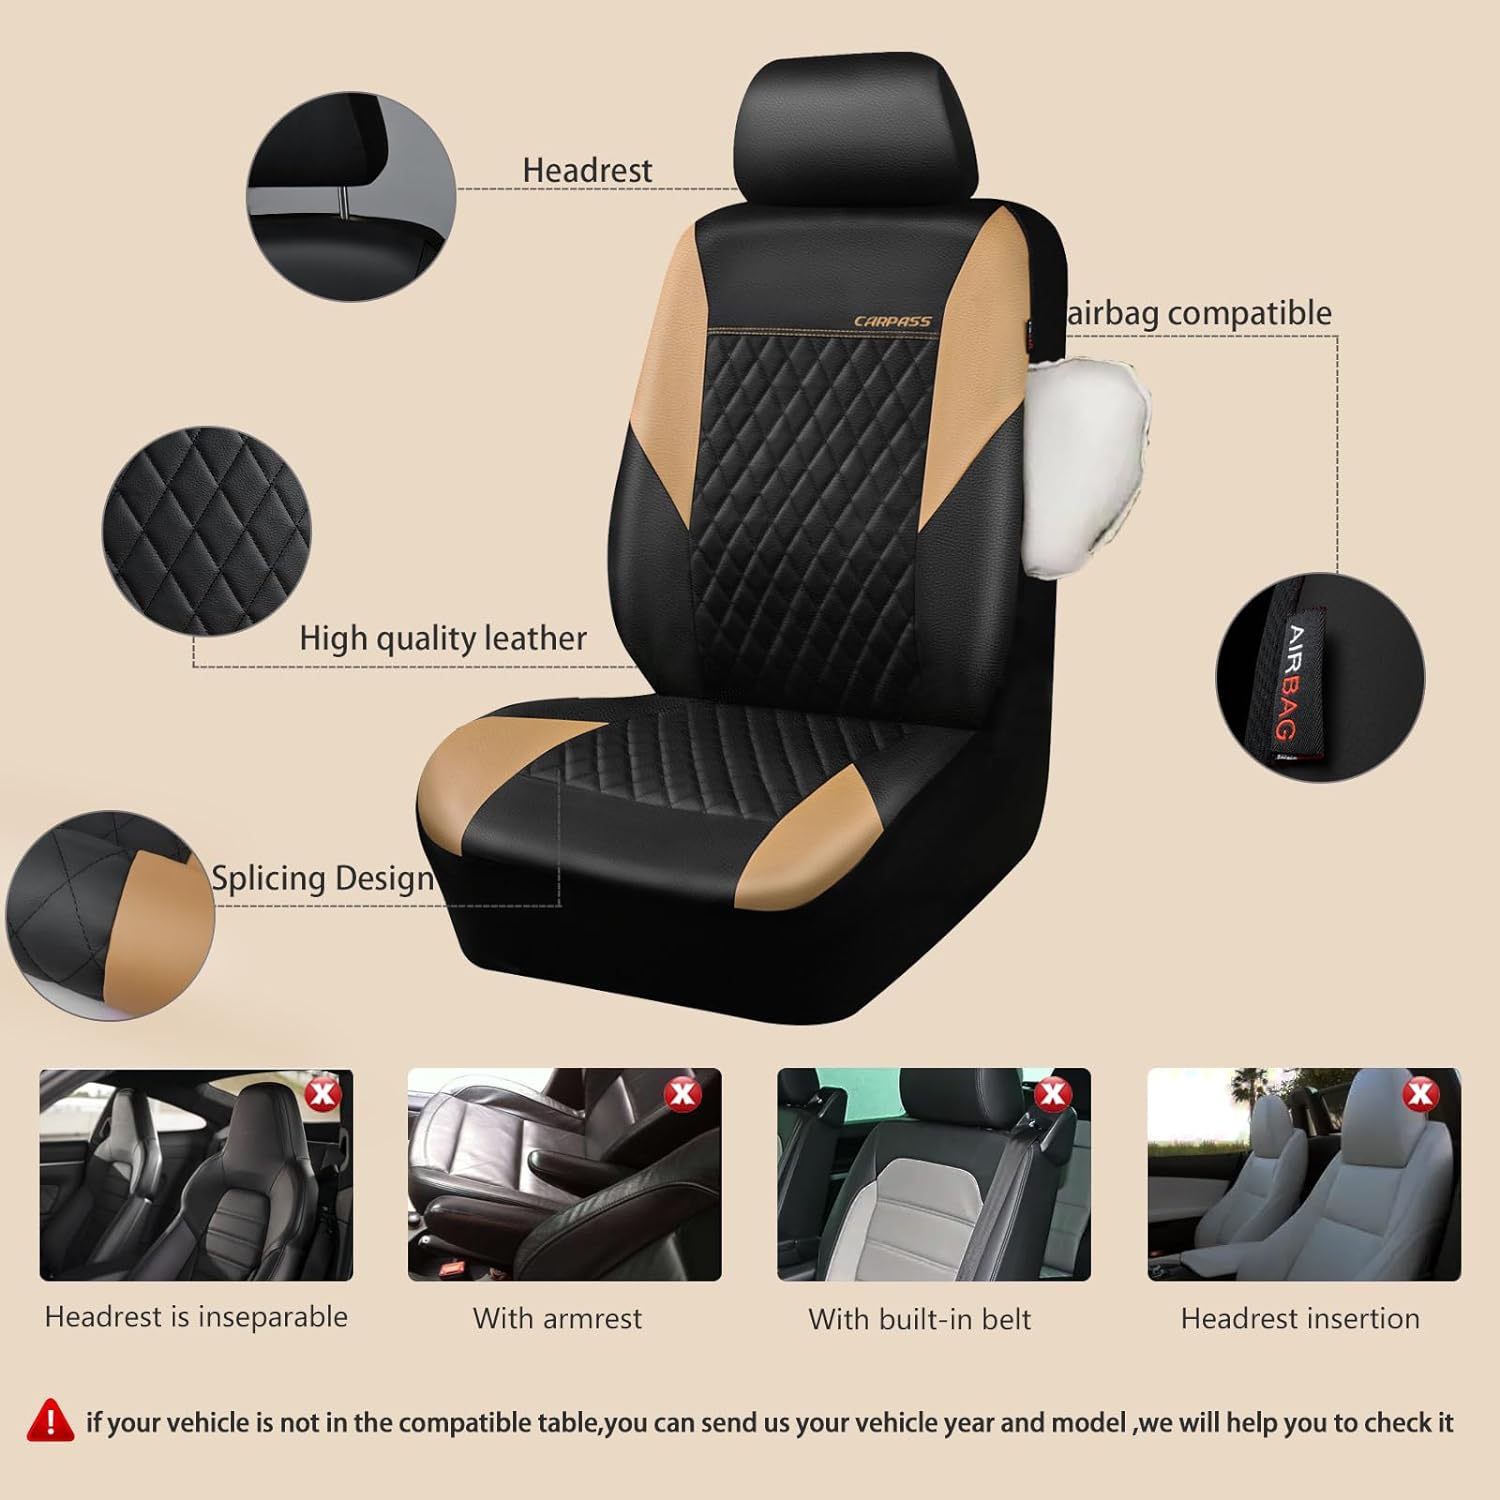 CAR PASS Wood Grain Microfiber Leather Steering Wheel Cover and Seat Cover Two Front Seats Only,Universal Fit for 14 1/2-15 inch Steering Wheel,Beige